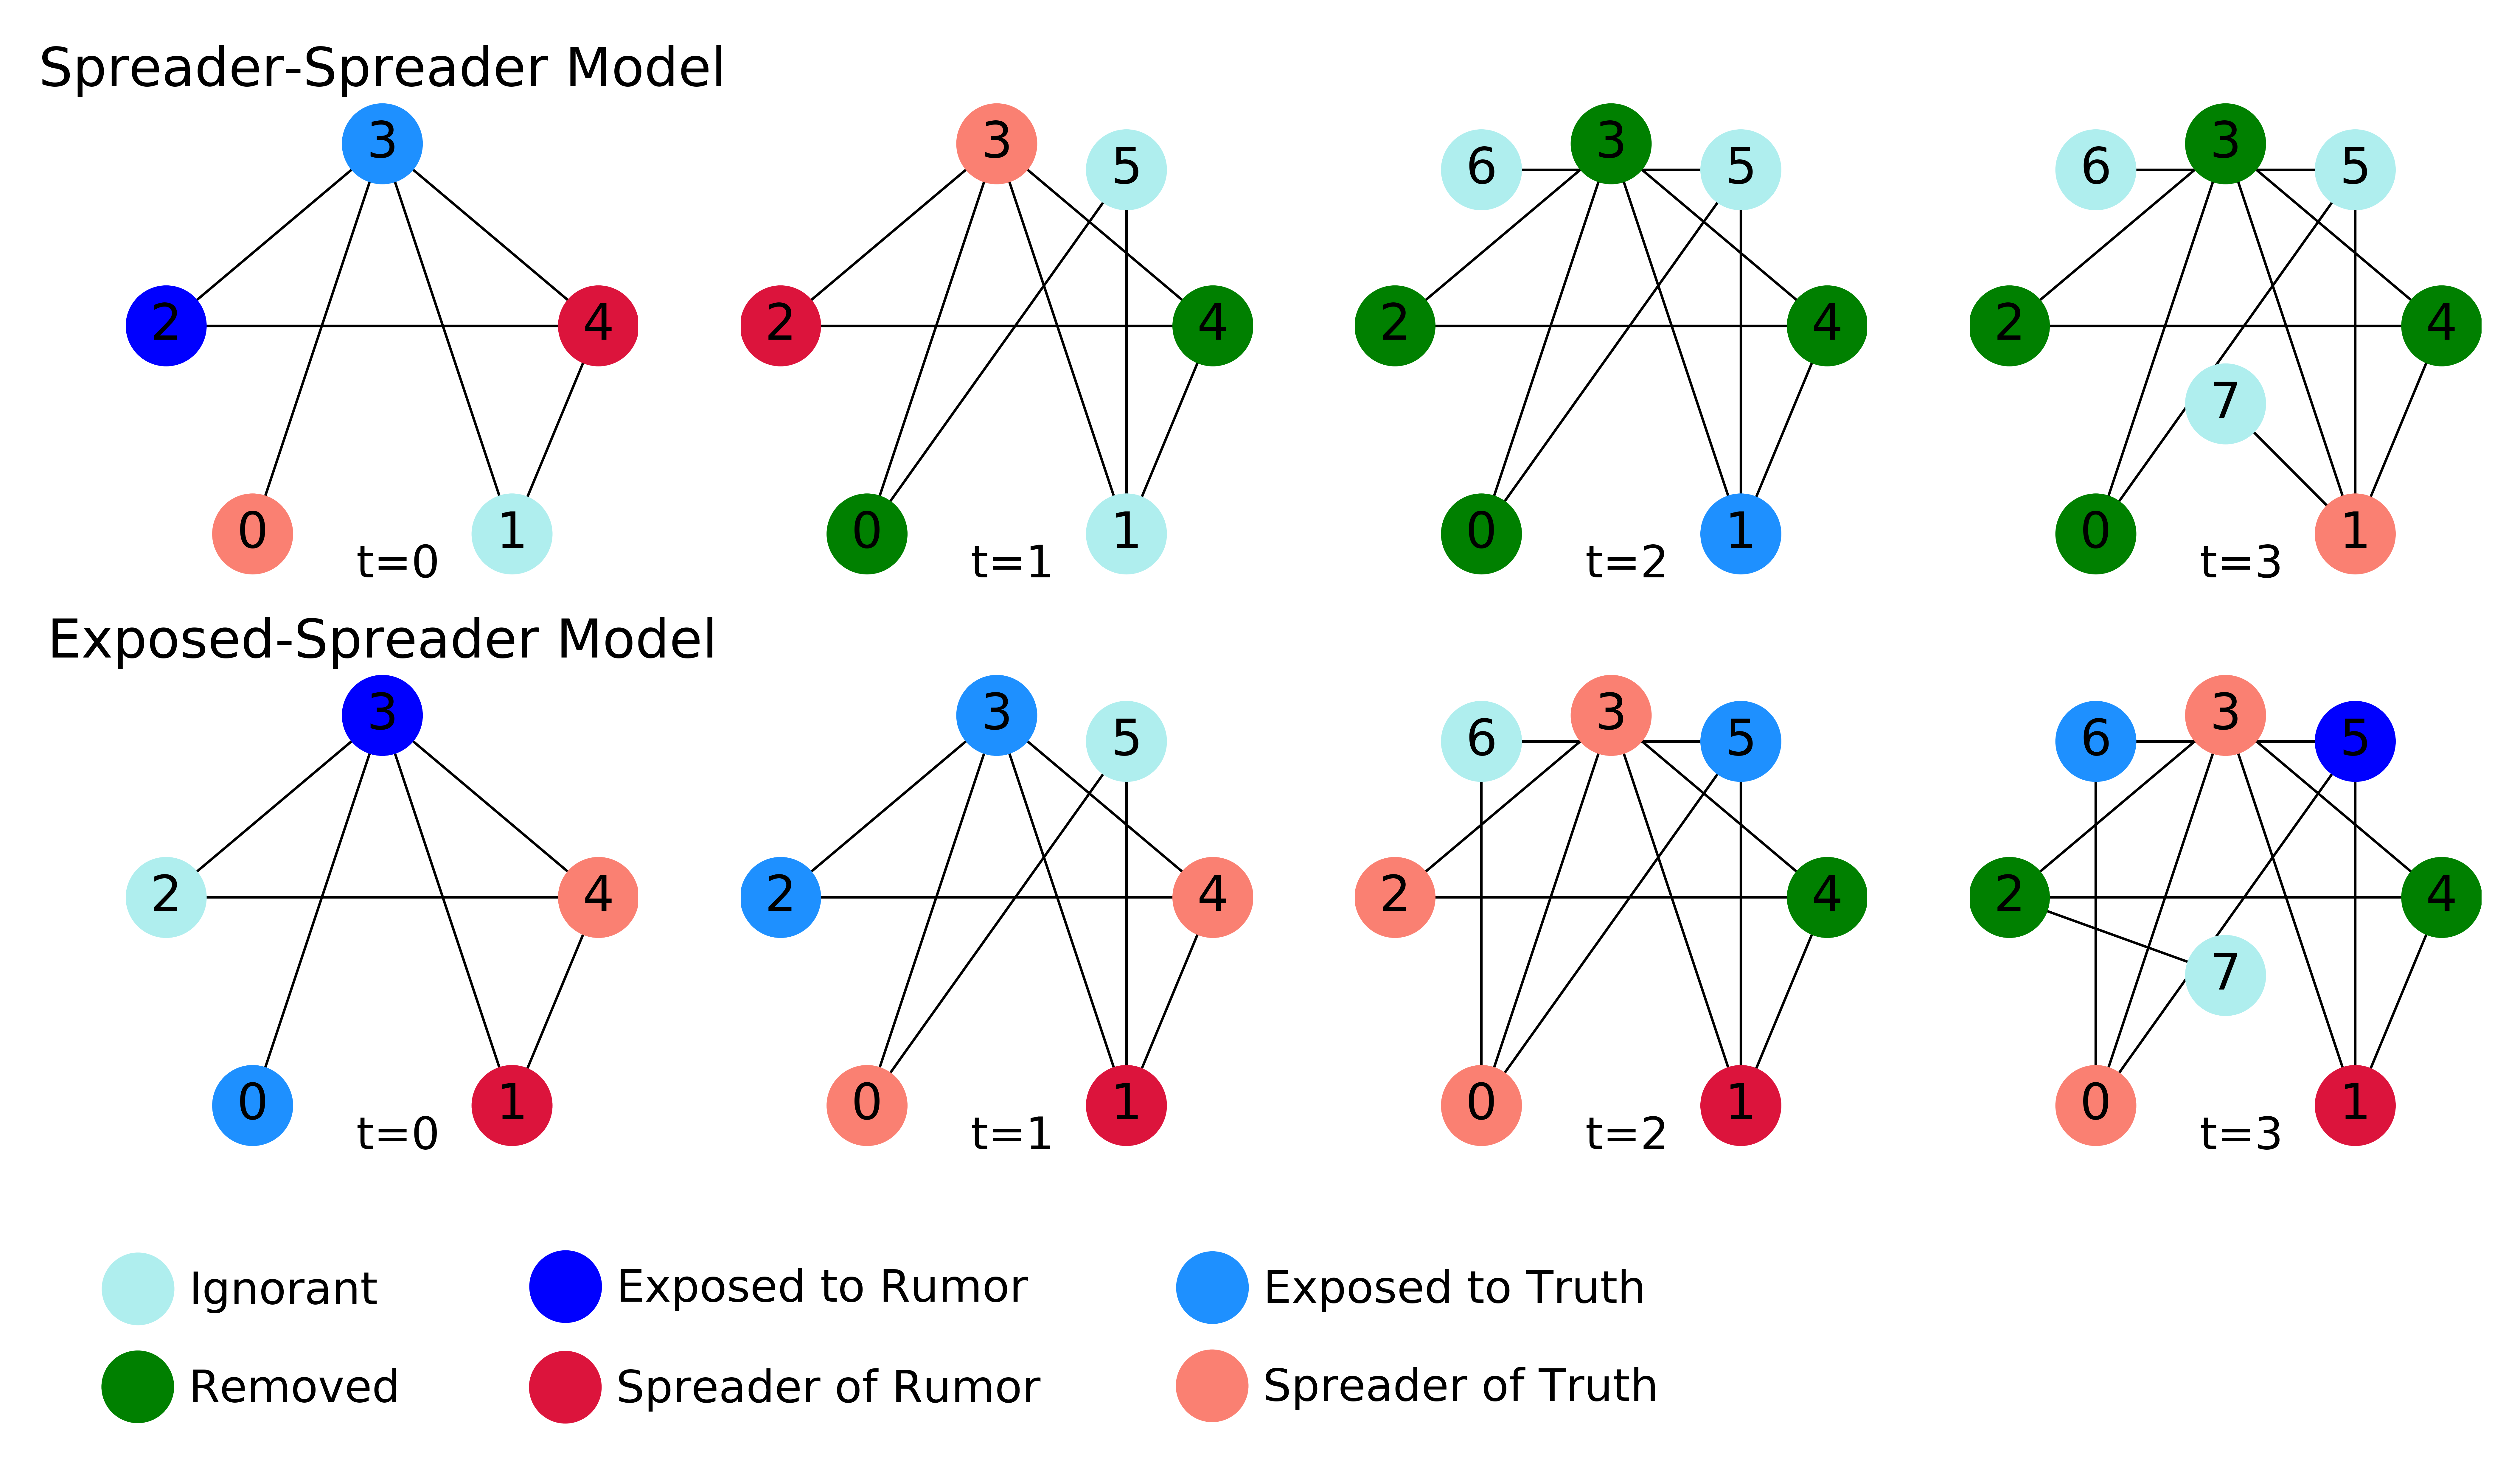 Toy network model of ignorant, exposed to, and spreader nodes.